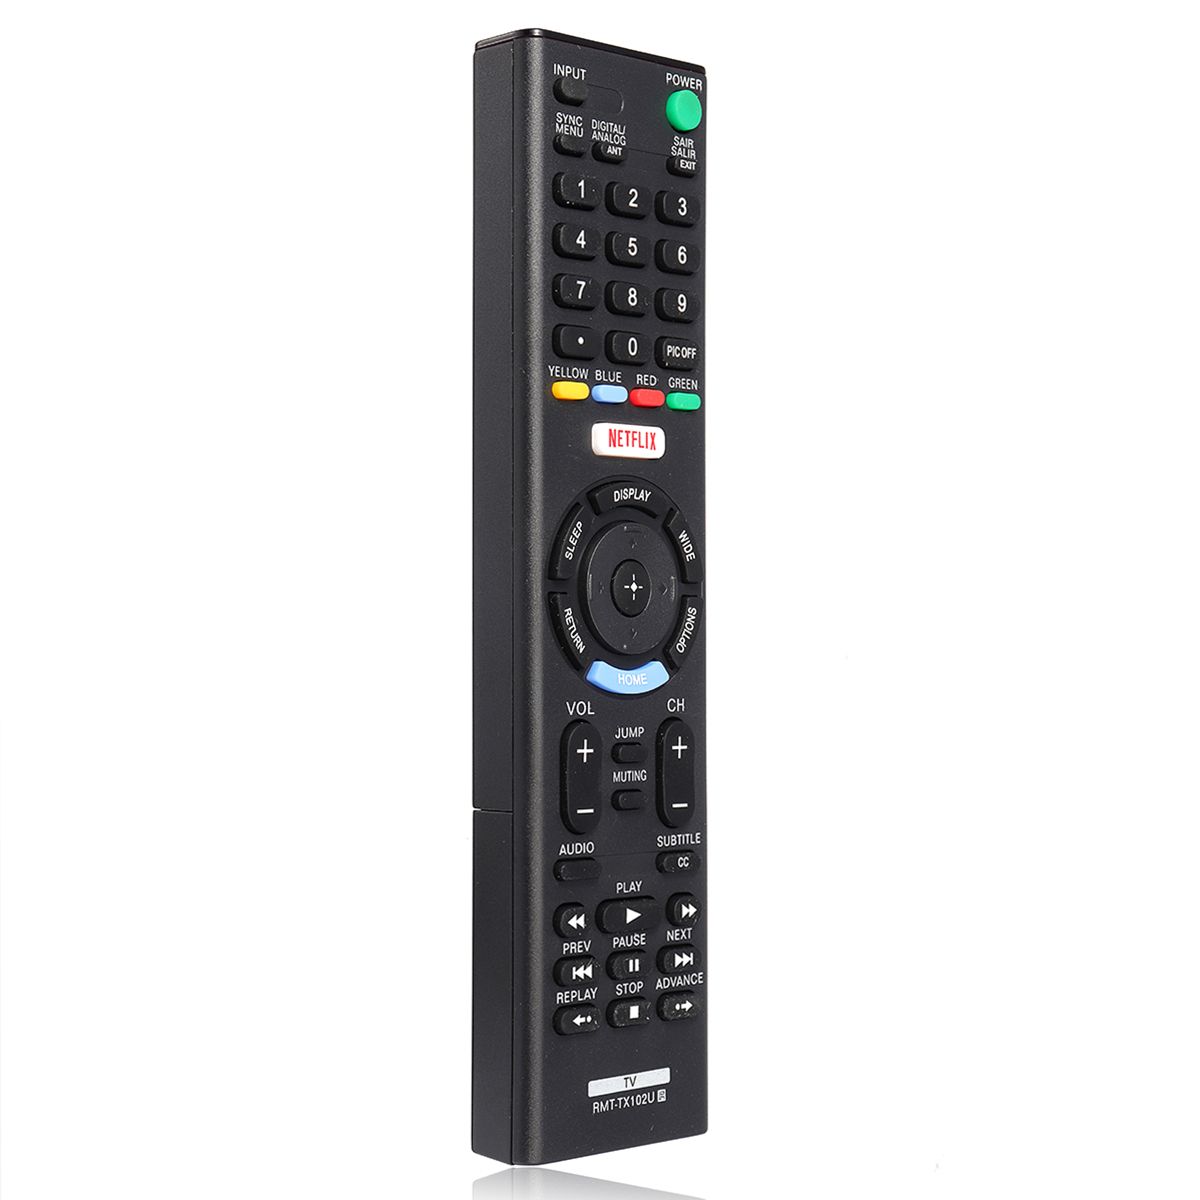 RMT-TX102U-Remote-Control-Replacement-For-SONY-KDL-48W650D-32W600D-40W600D-TV-1413697